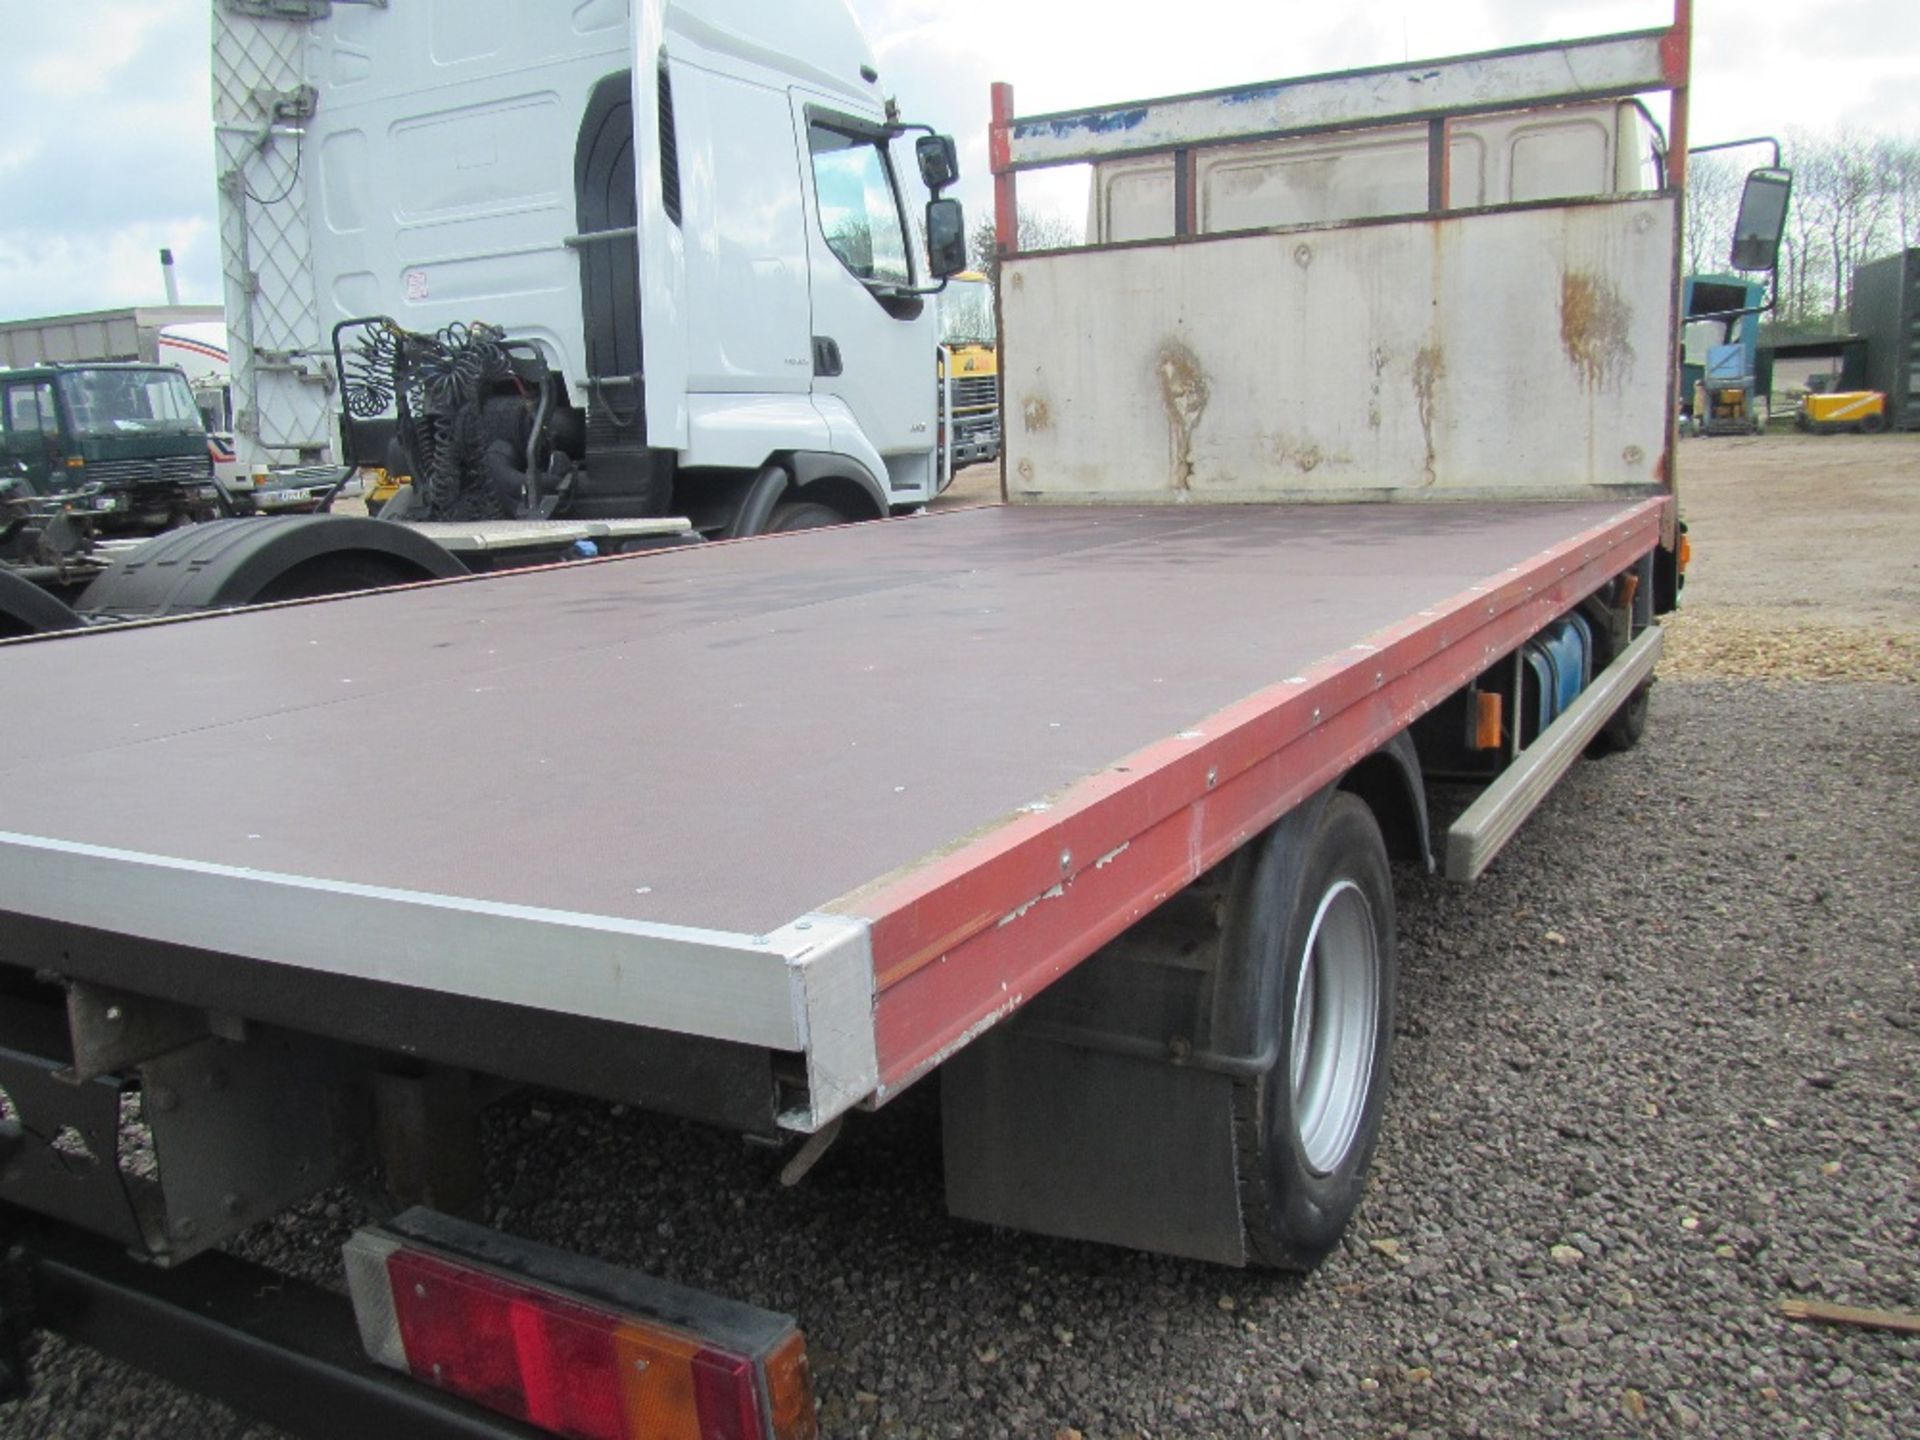 1994 Man 7.5 Ton Flat bed c/w New Floor Fitted. Reg Docs will be supplied. Reg. No. M134 OKK - Image 7 of 7